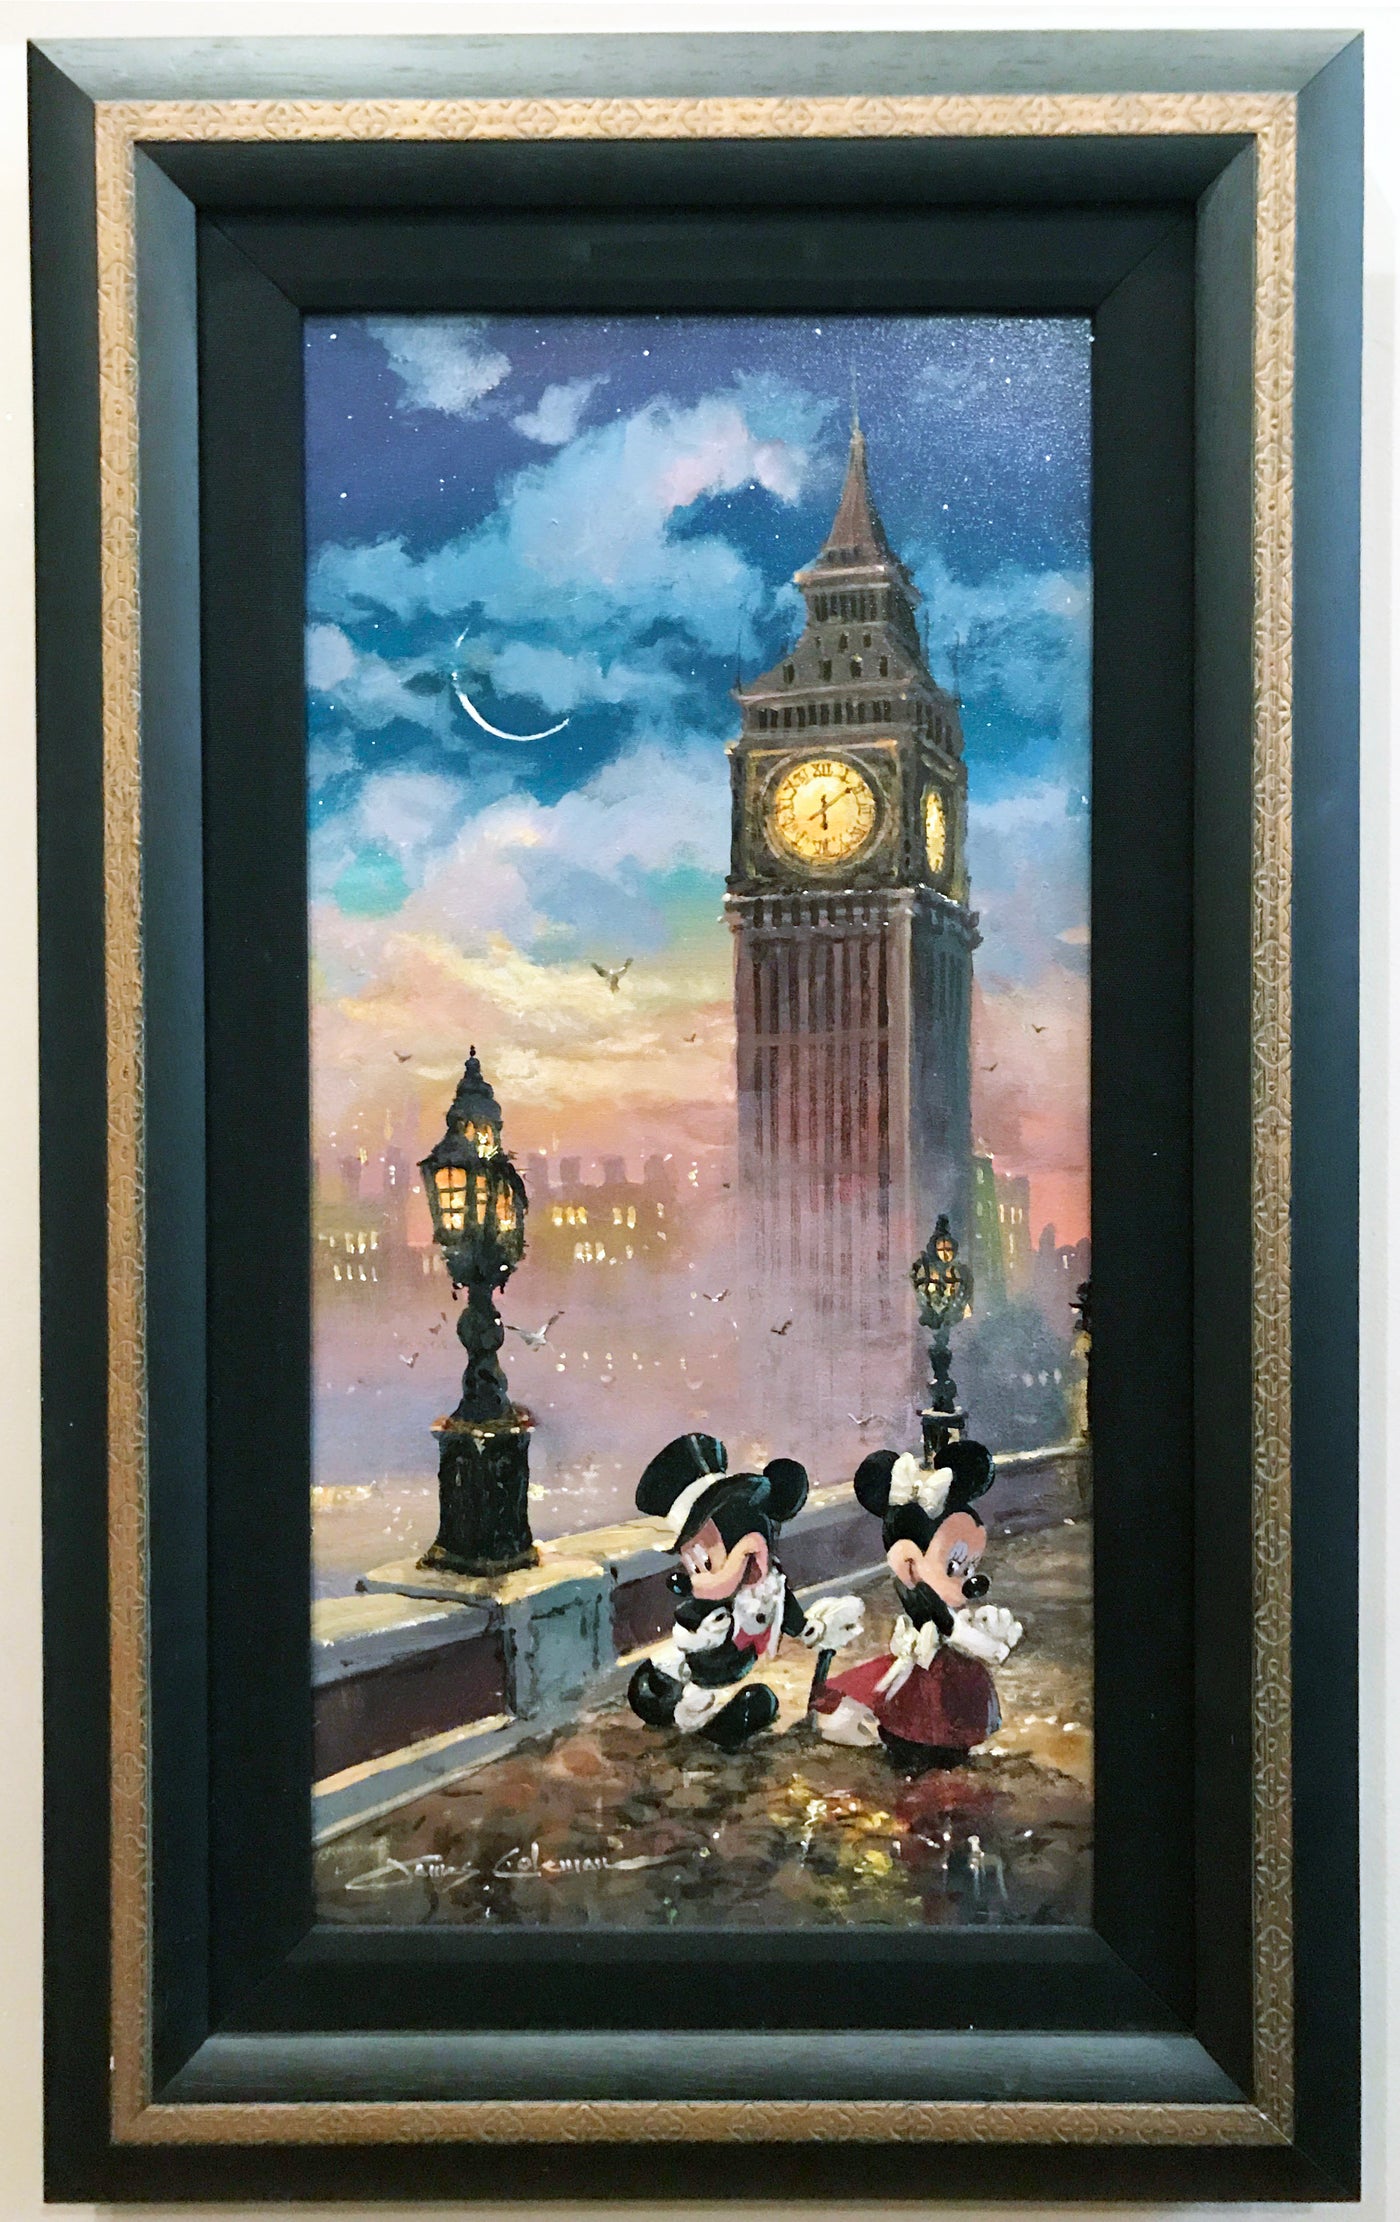 Original Walt Disney James Coleman Acrylic Painting on Canvas featuring Mickey and Minnie signed